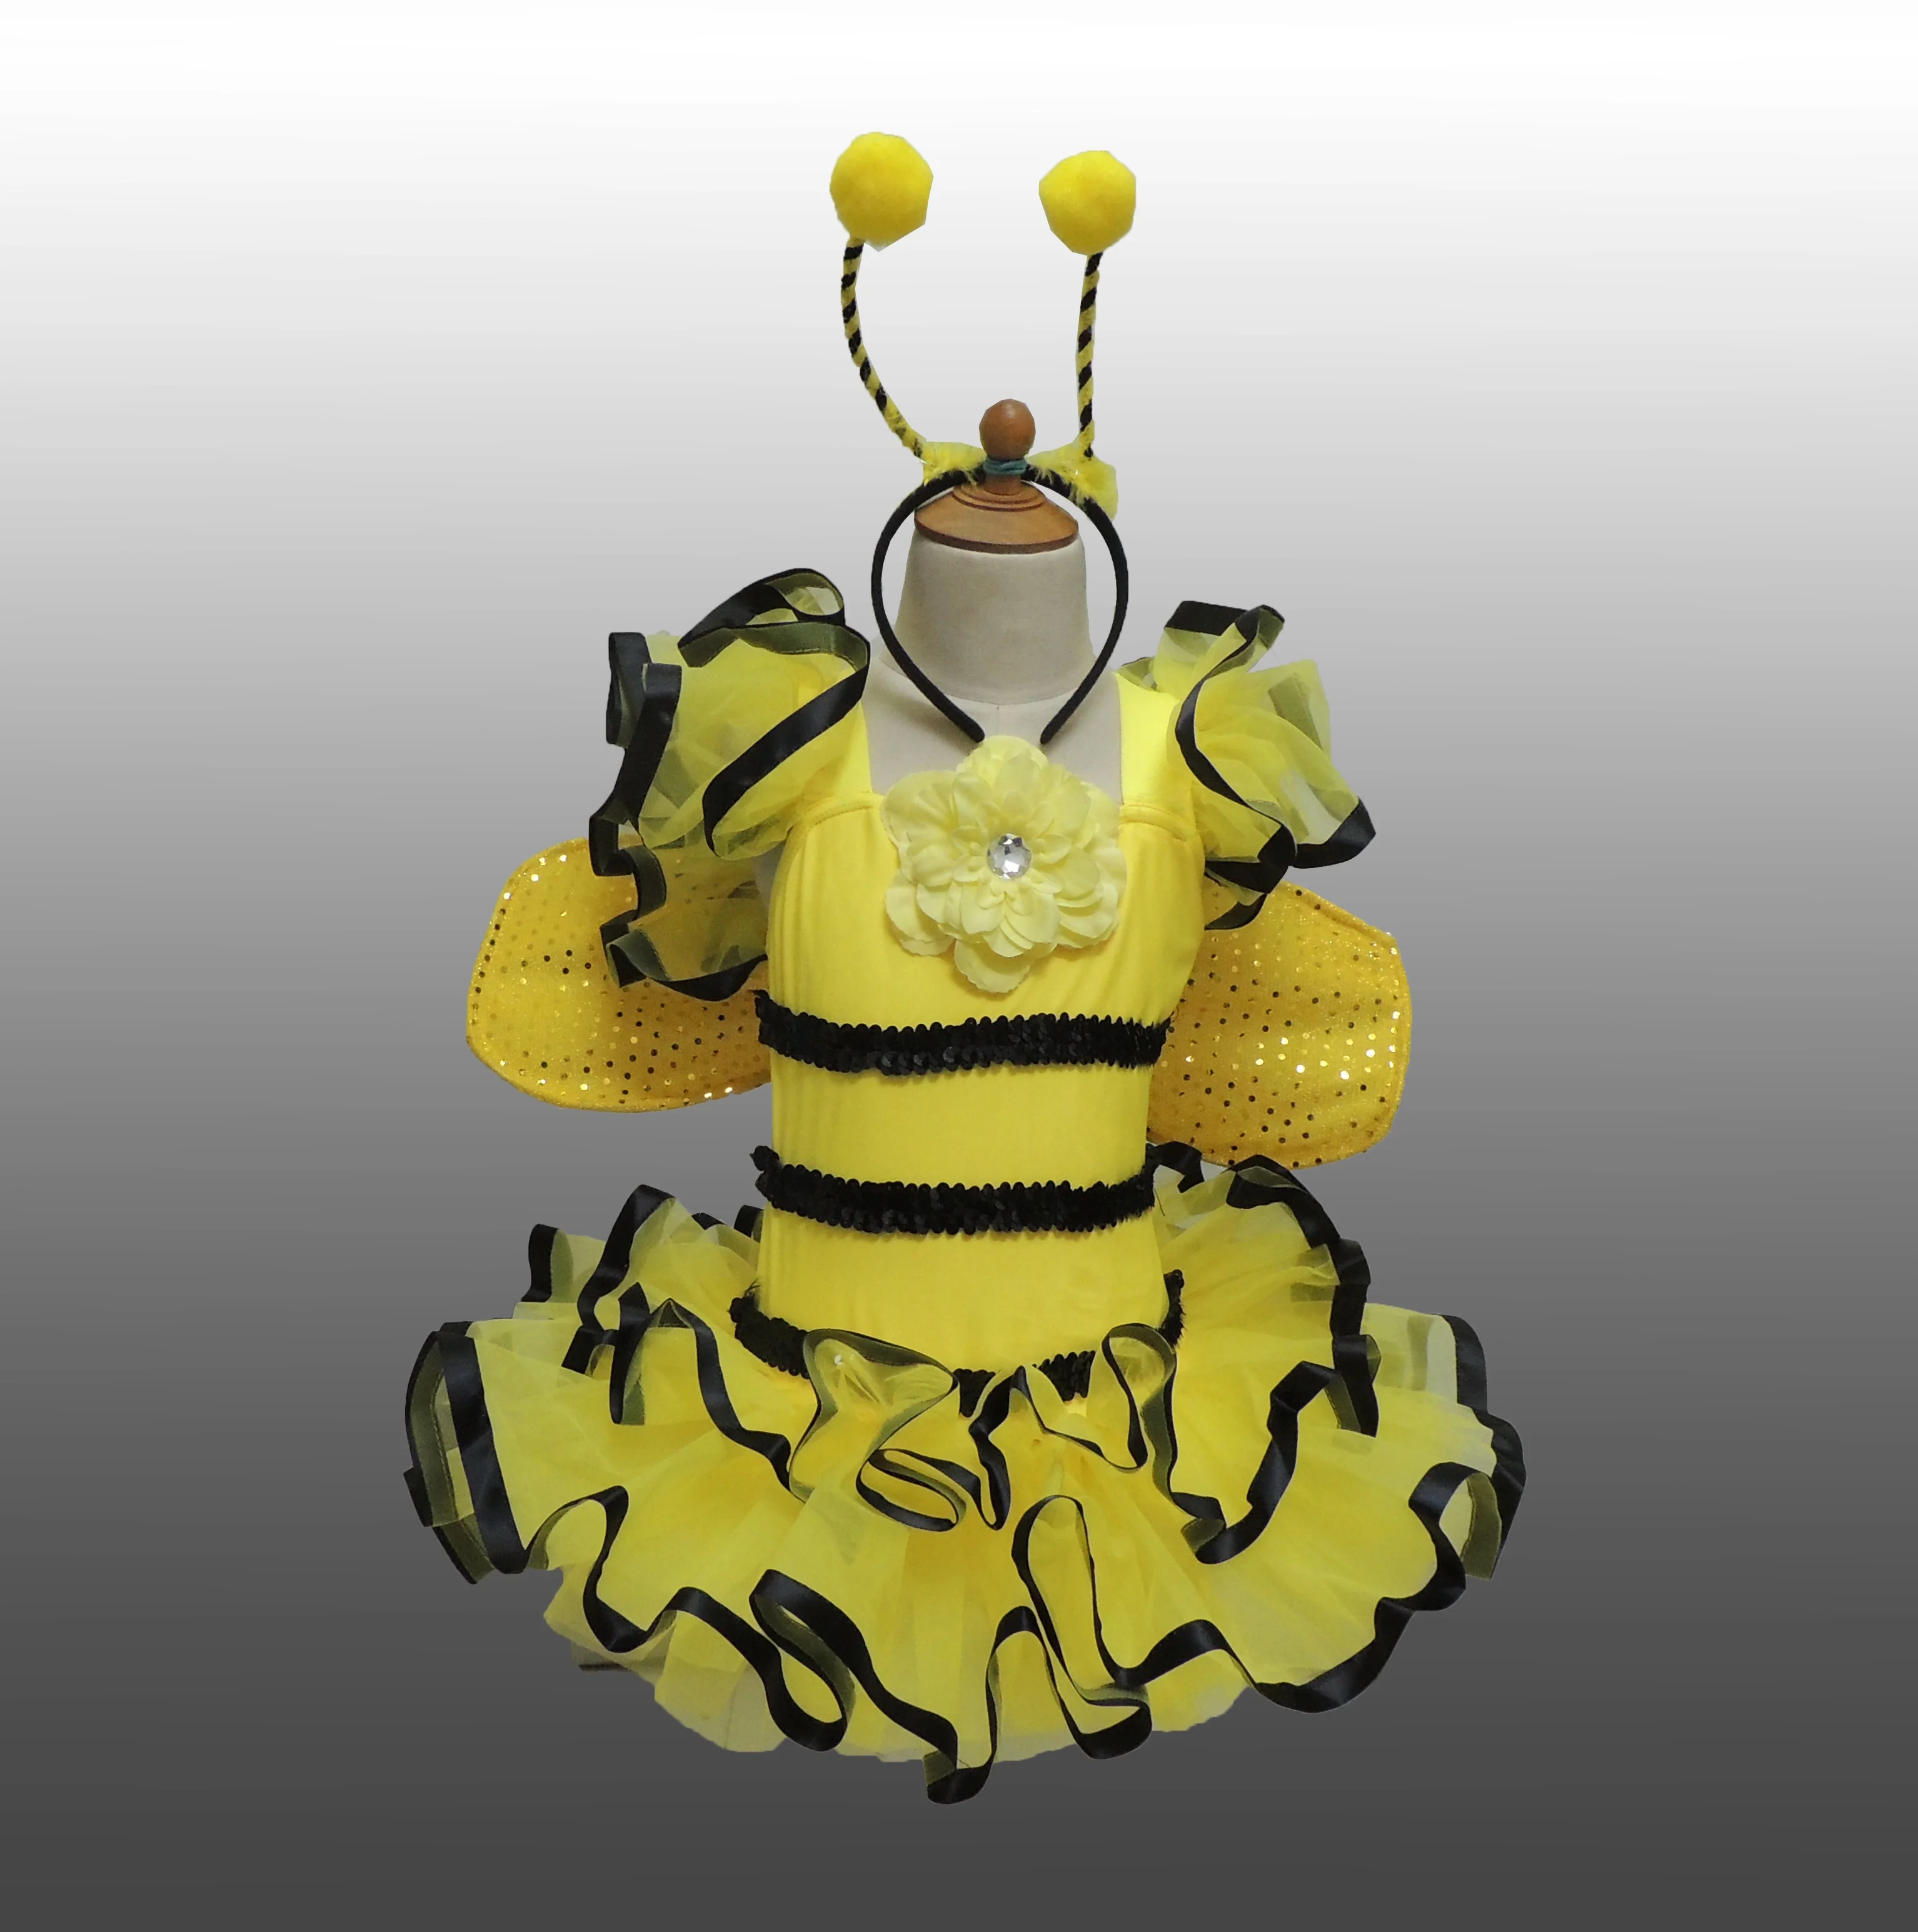 Funny Animal Costumes For Child Dance Bee - Buy Teen Bee Costumes,Hot Furry  Animal Costume,Women Sexy Mature Animal Costume Product on 